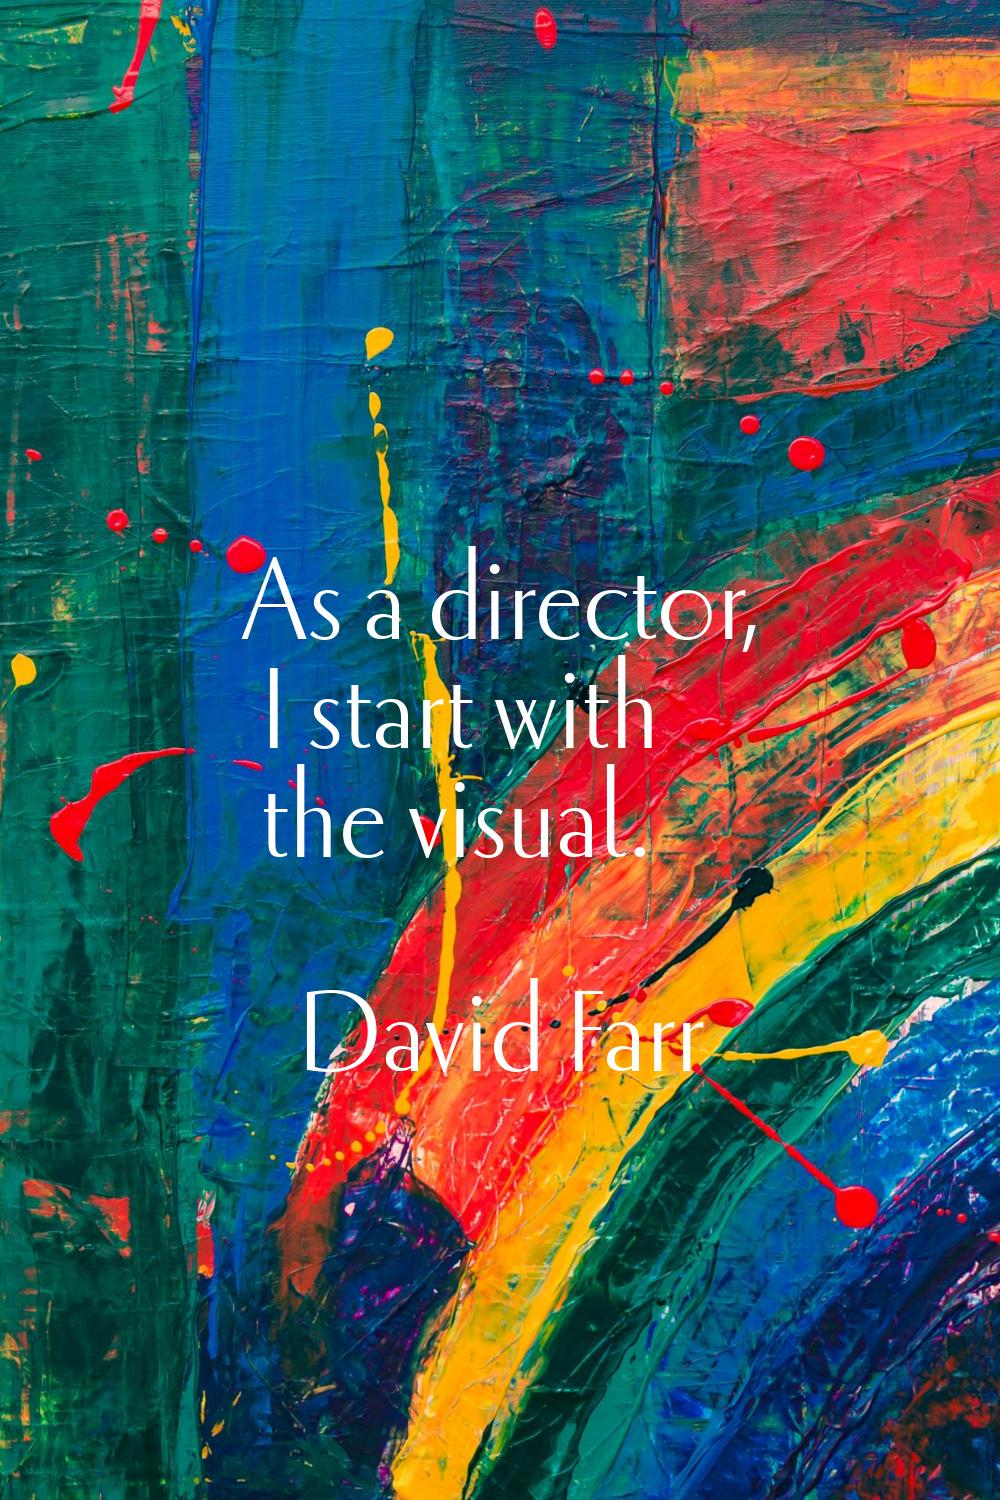 As a director, I start with the visual.